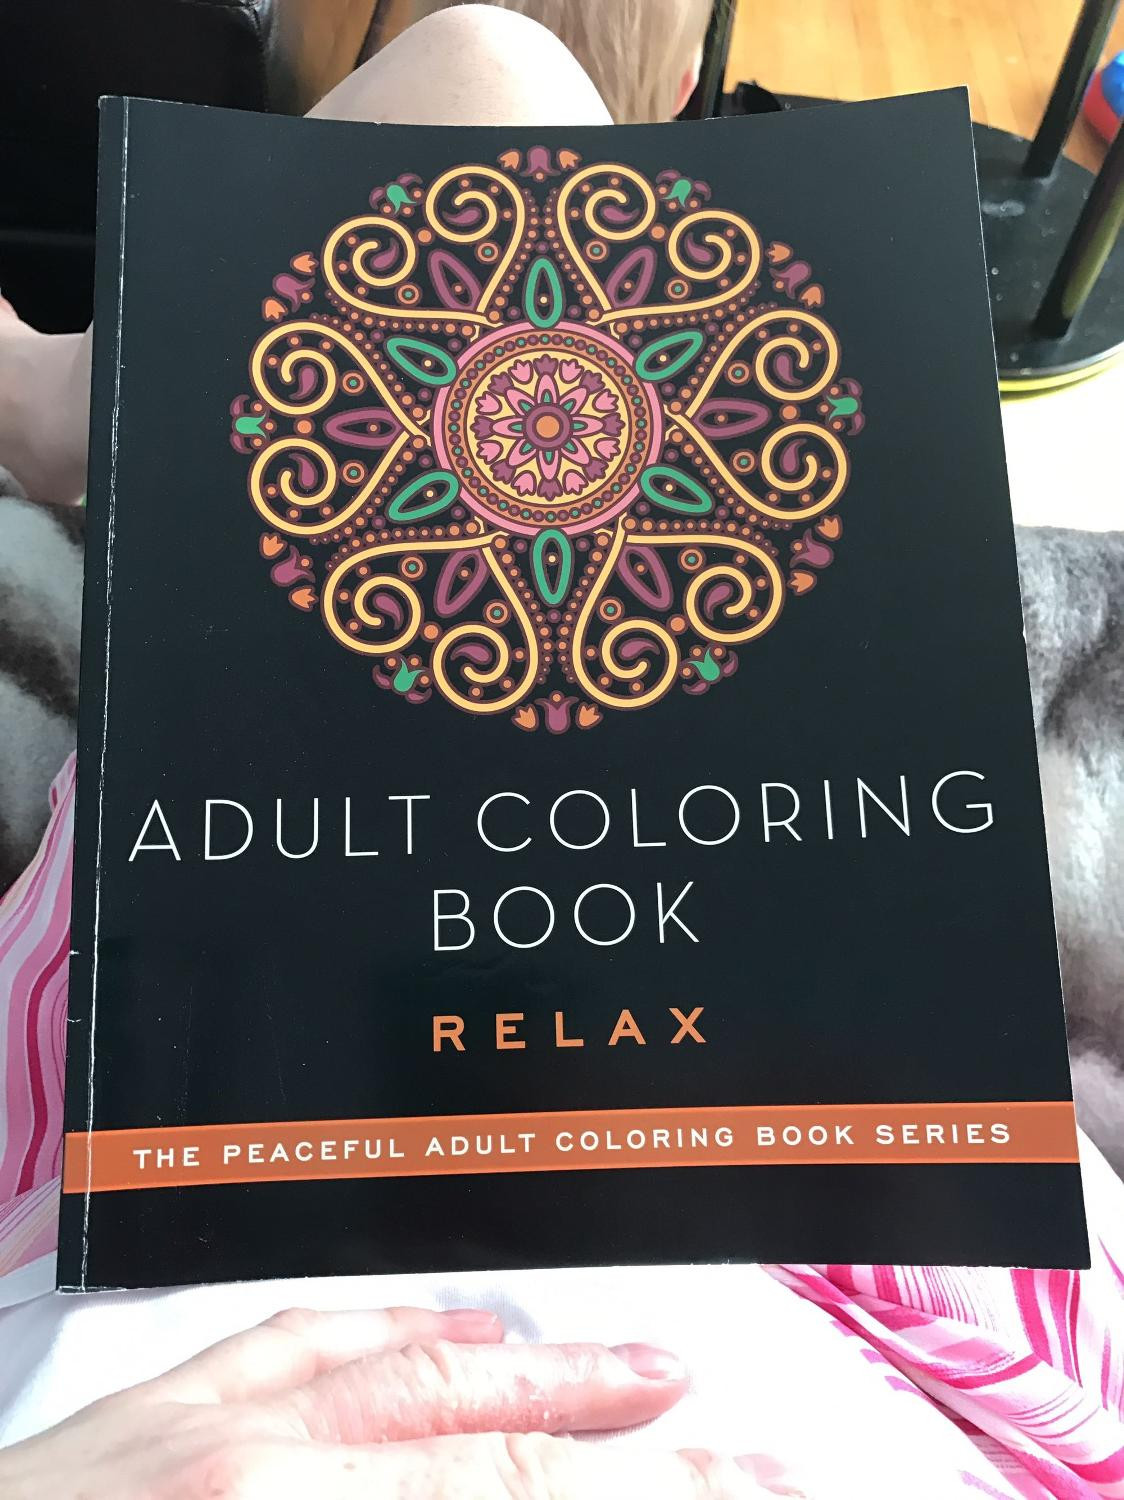 Adult Coloring Books For Sale
 Find more Adult Coloring Book Relax for sale at up to 